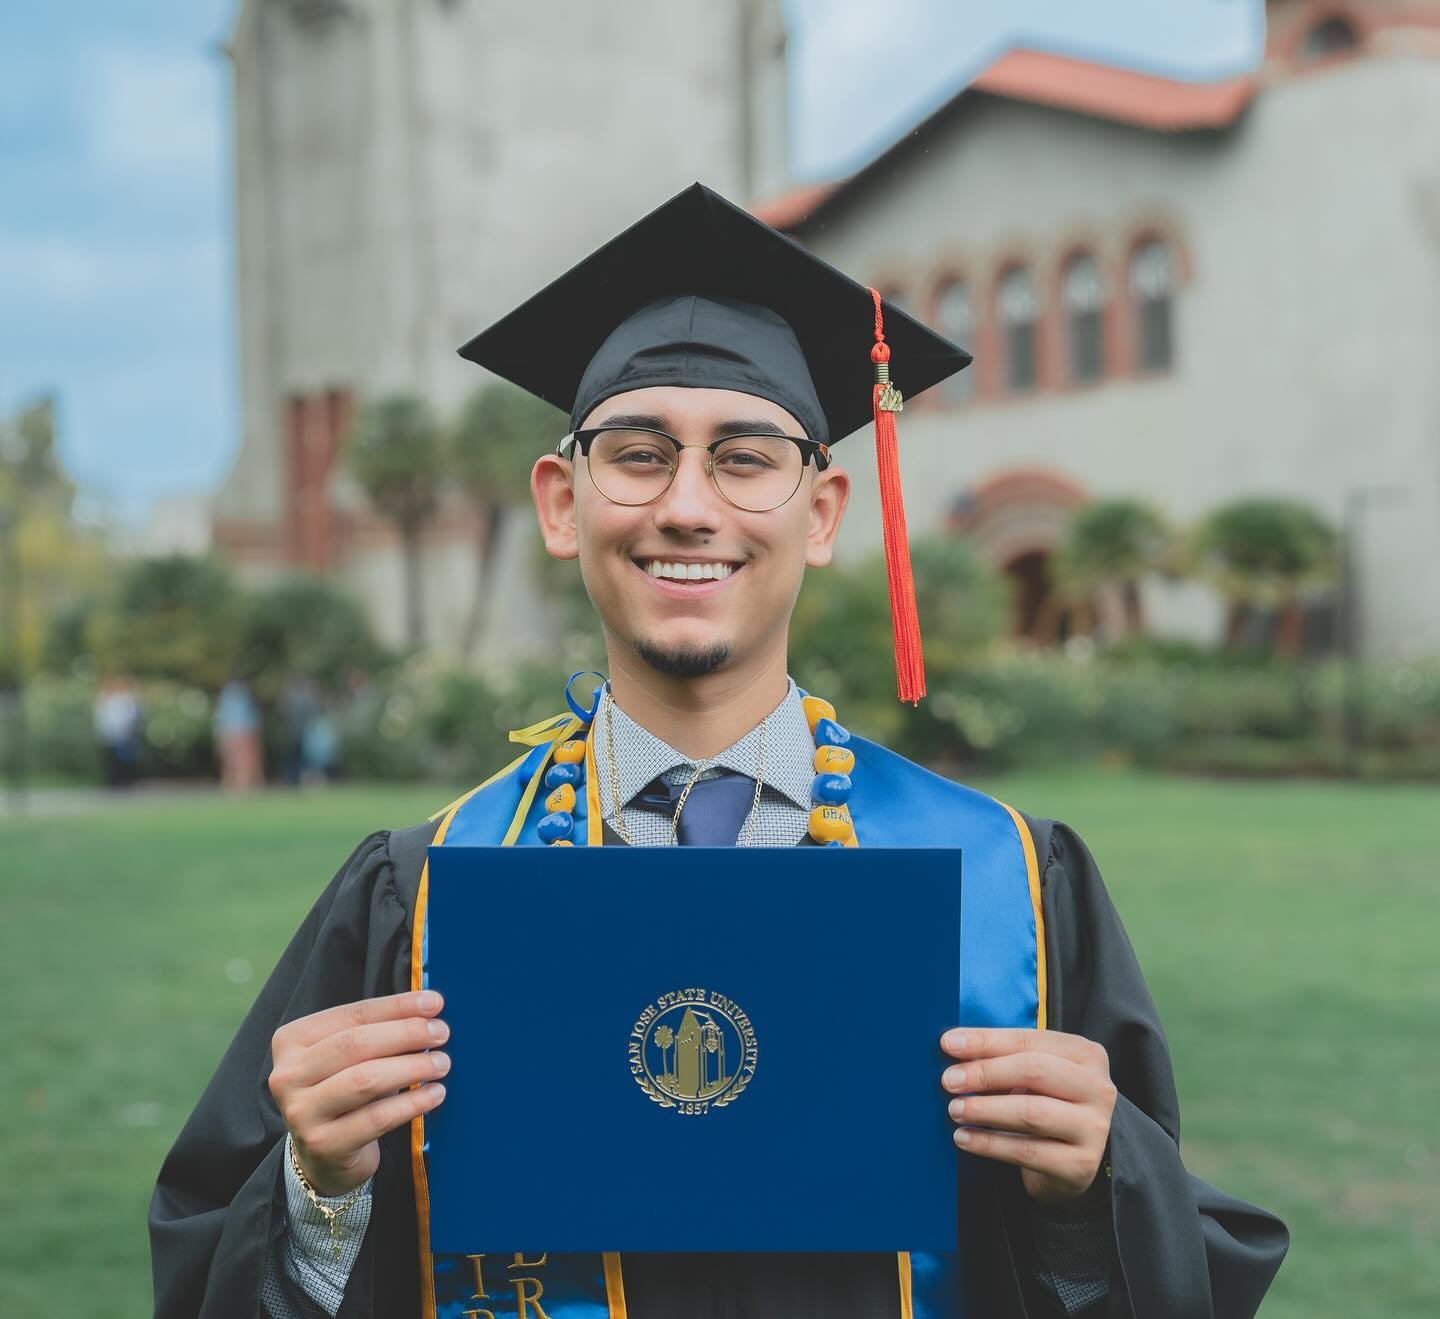 🎓 incredible achievement! ☺️ happy and grateful to take this moment for all graduates! Let&rsquo;s go SJSU!

#sjsu #sjsugradphotographer #sjsugraduation #sanjosephotographer #sanjosephotography #graduationphotography #graduationphotographer #sanjose